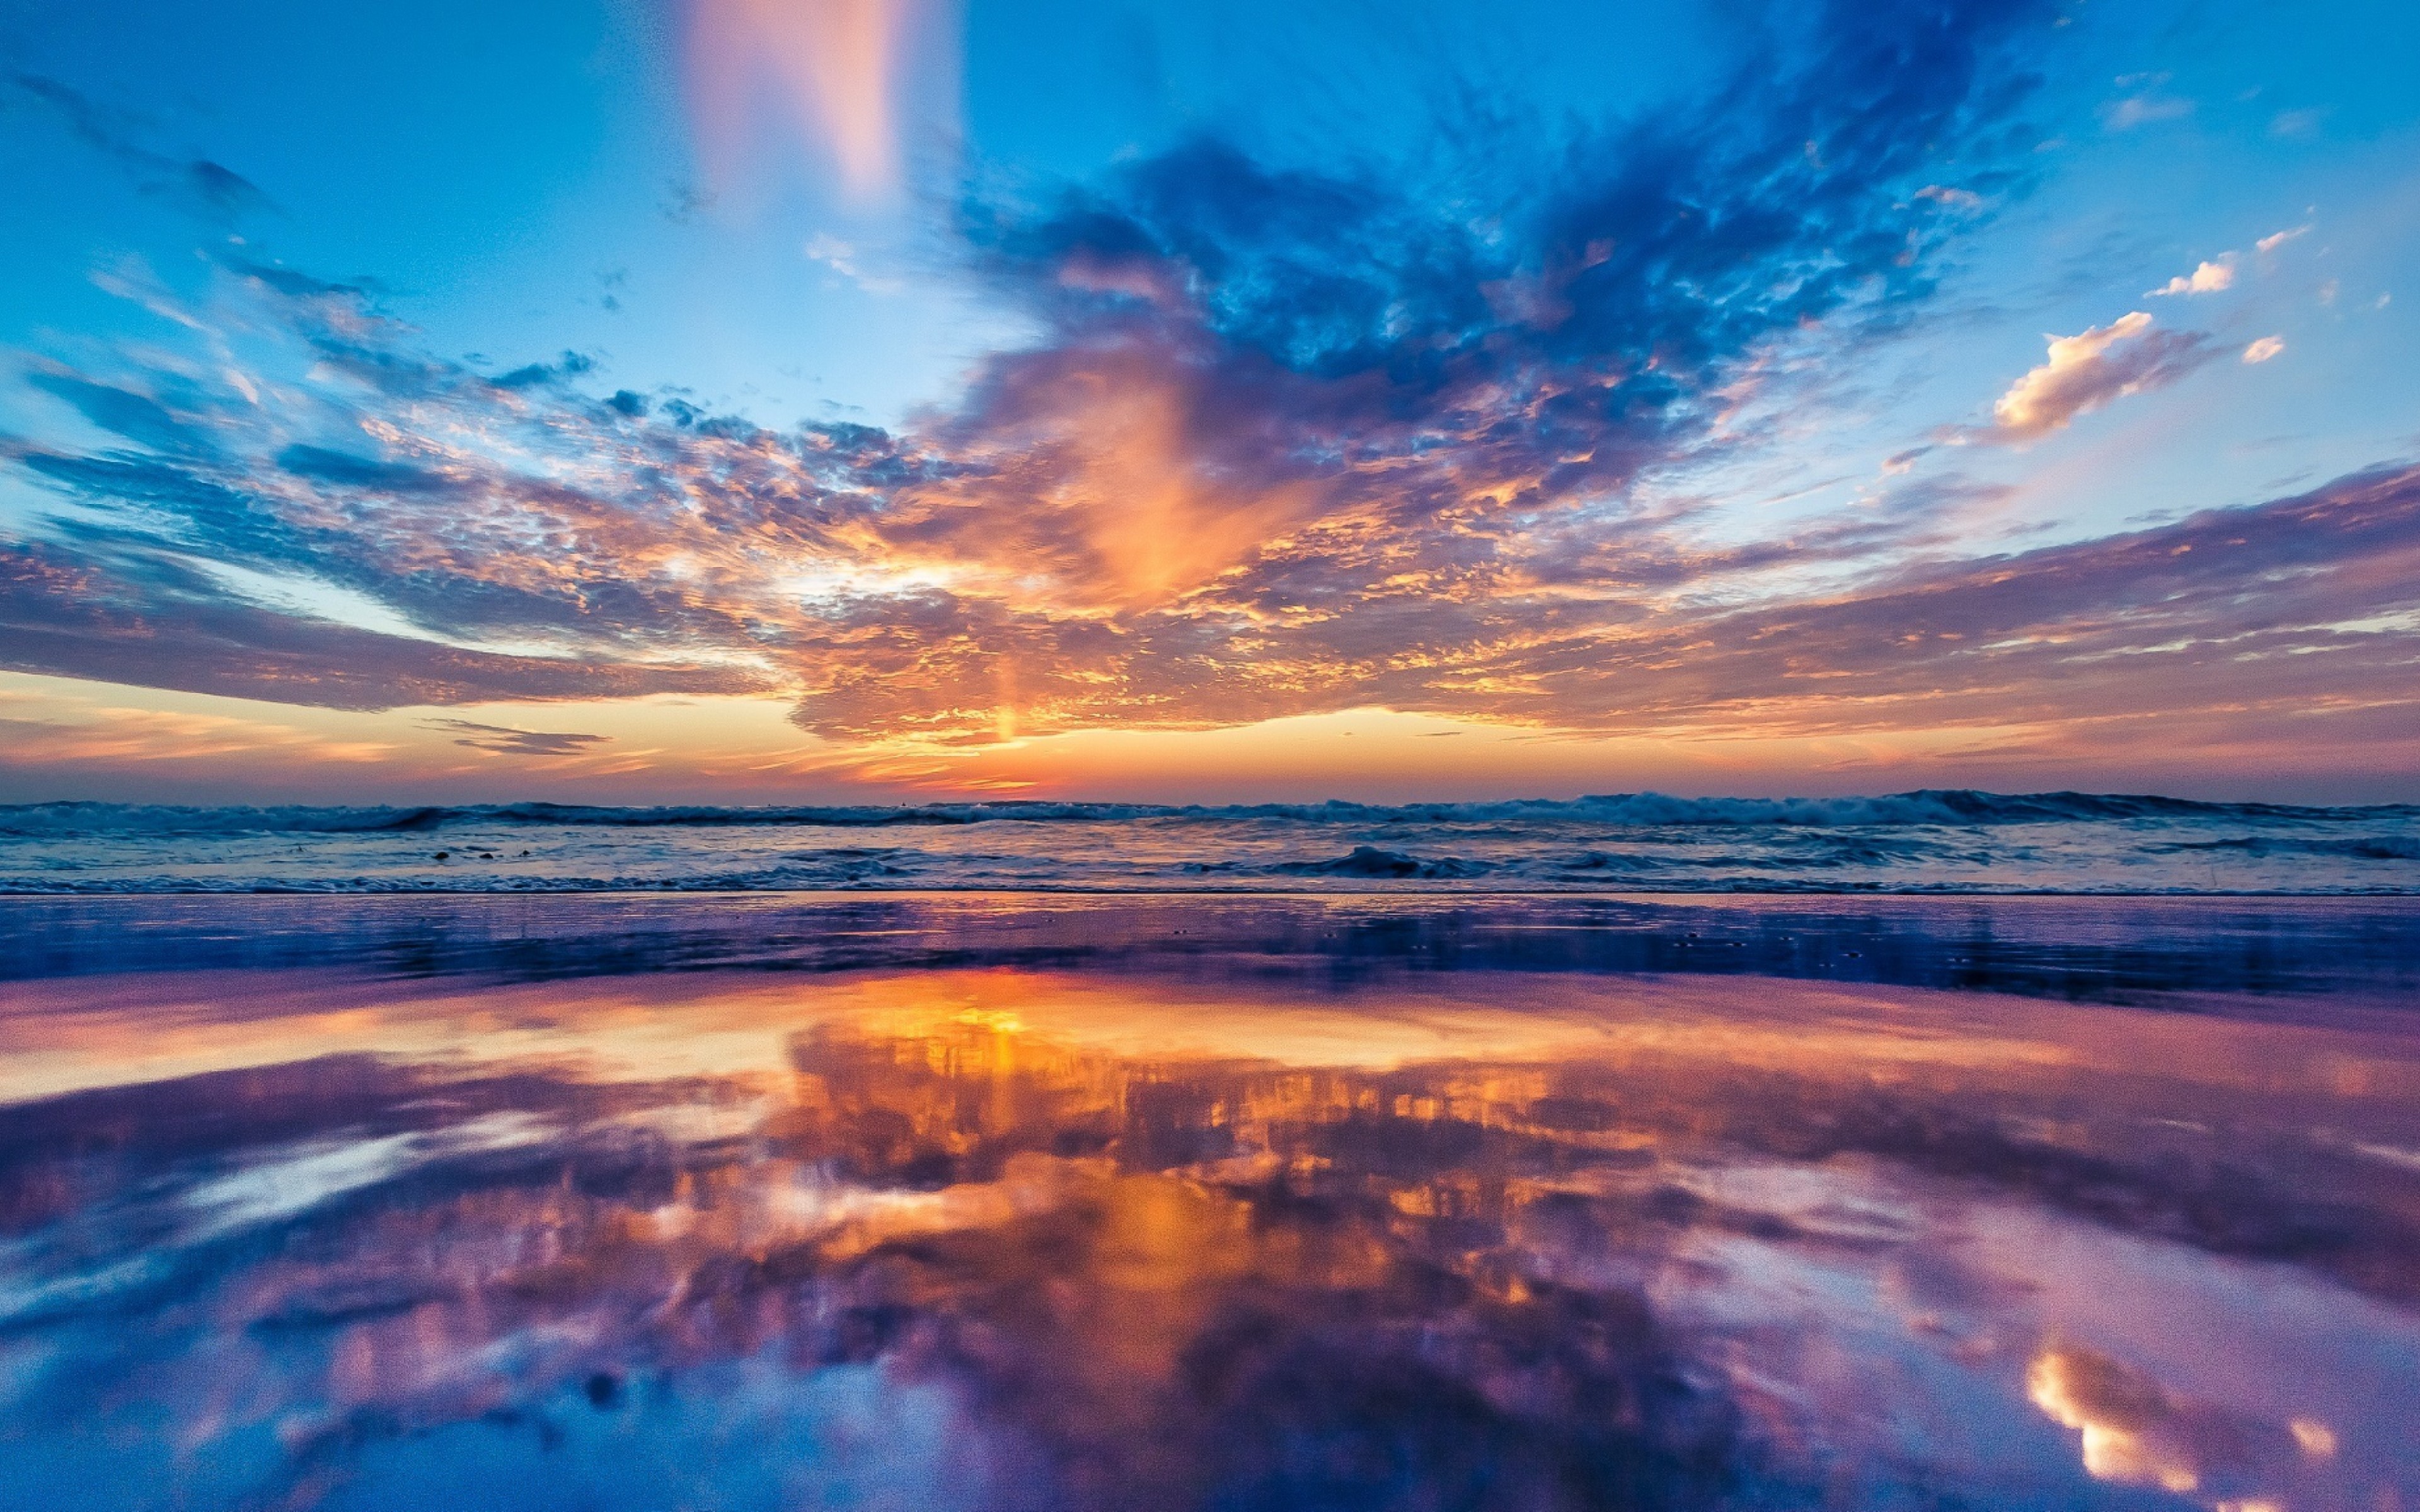 Sky at sunset reflected in the sea Wallpaper 4k Ultra HD